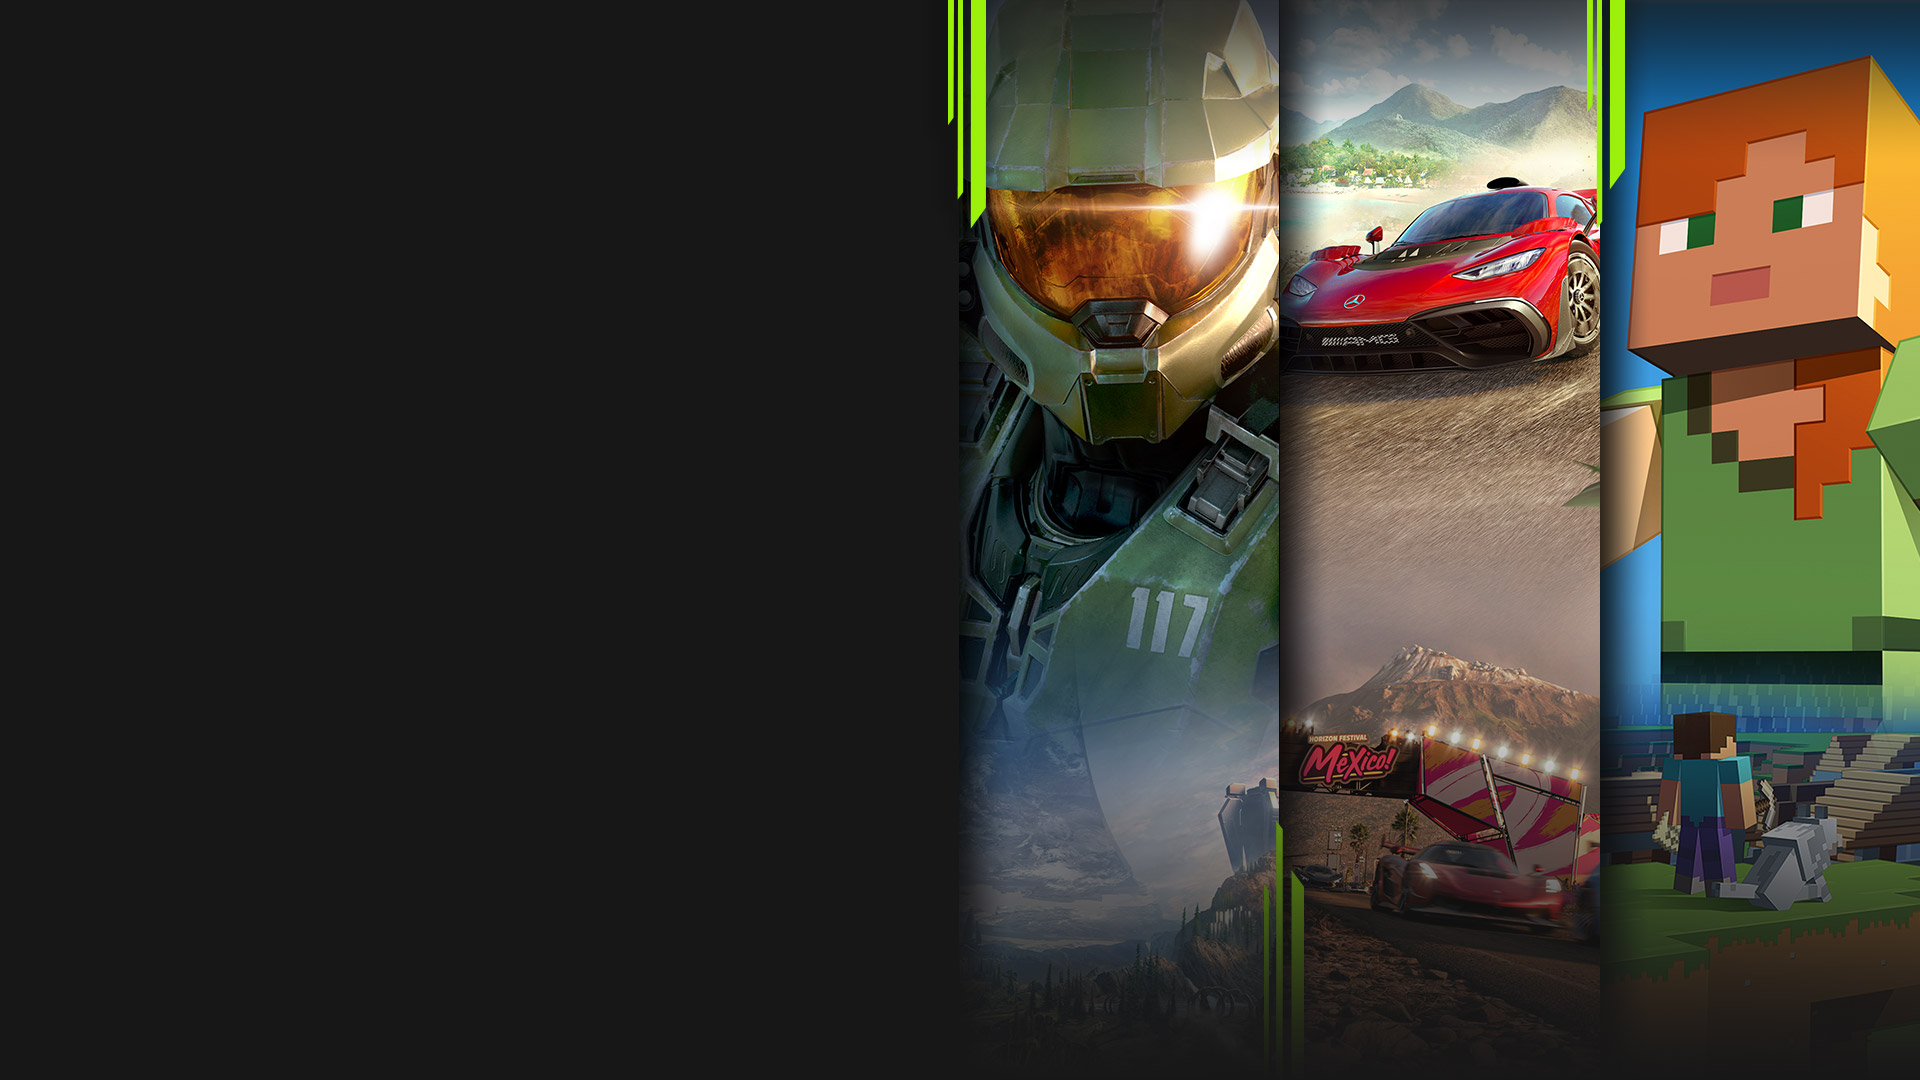 Game art from multiple games available with PC Game Pass including Halo Infinite, Forza Horizon 5, Minecraft and Age of Empires IV.